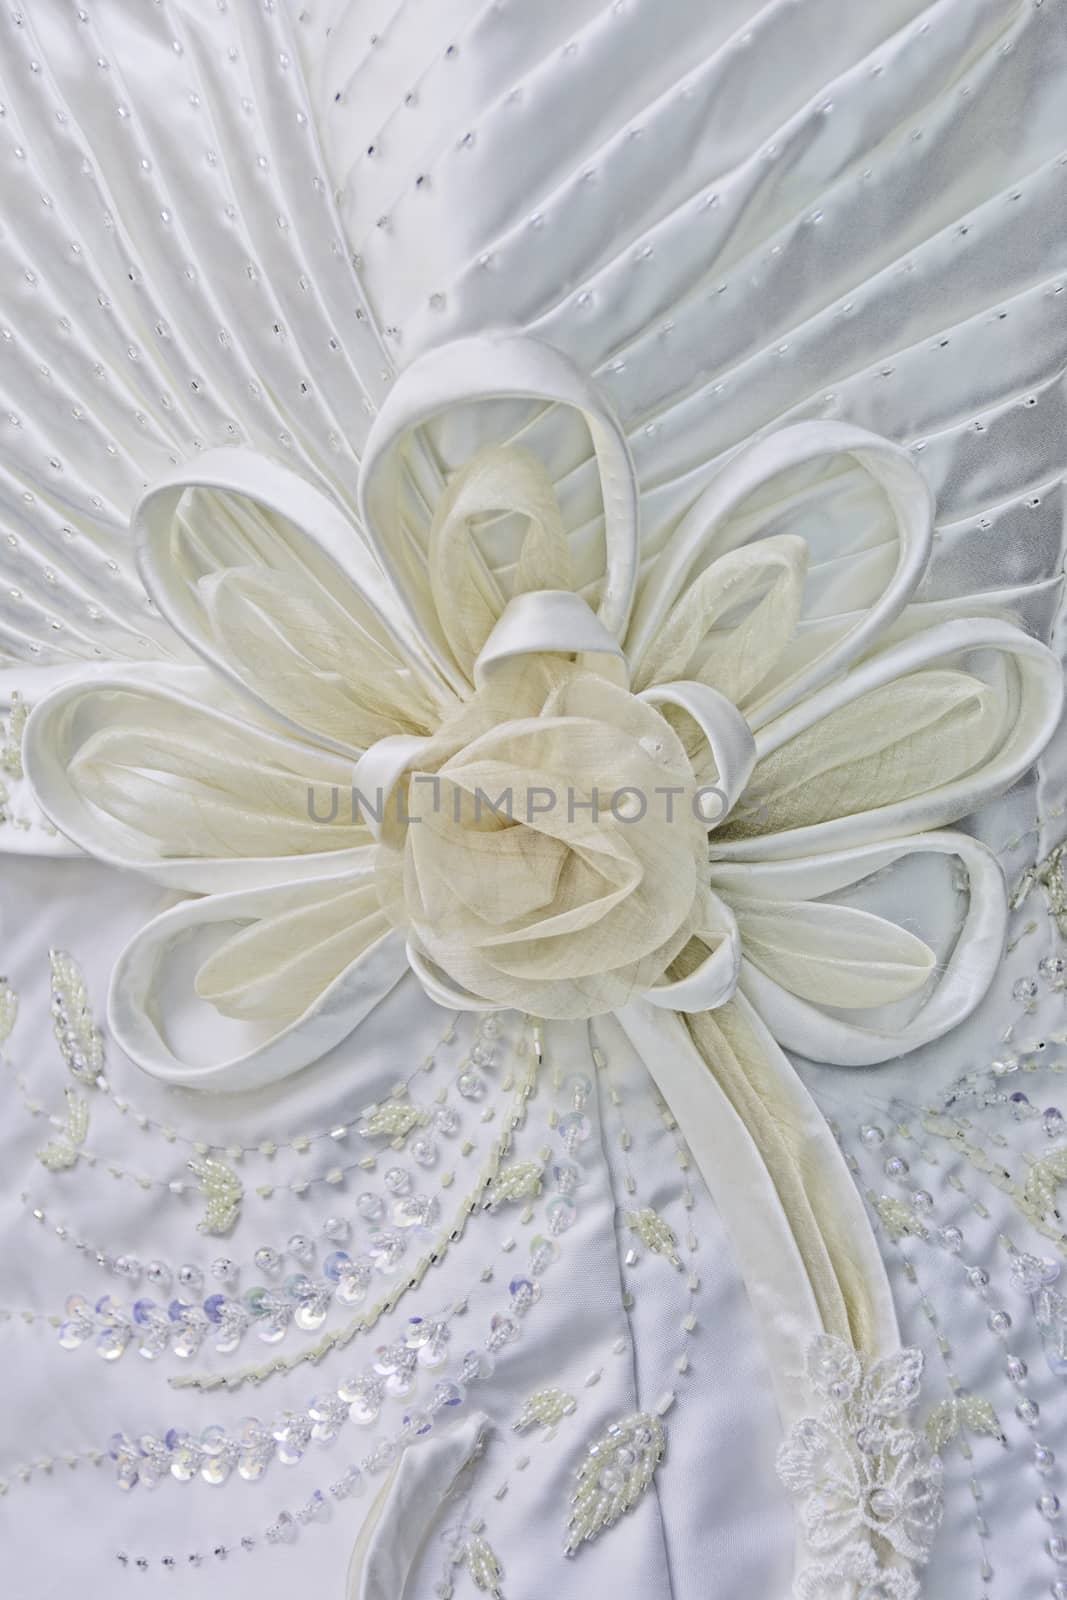 Texture of white wedding gown